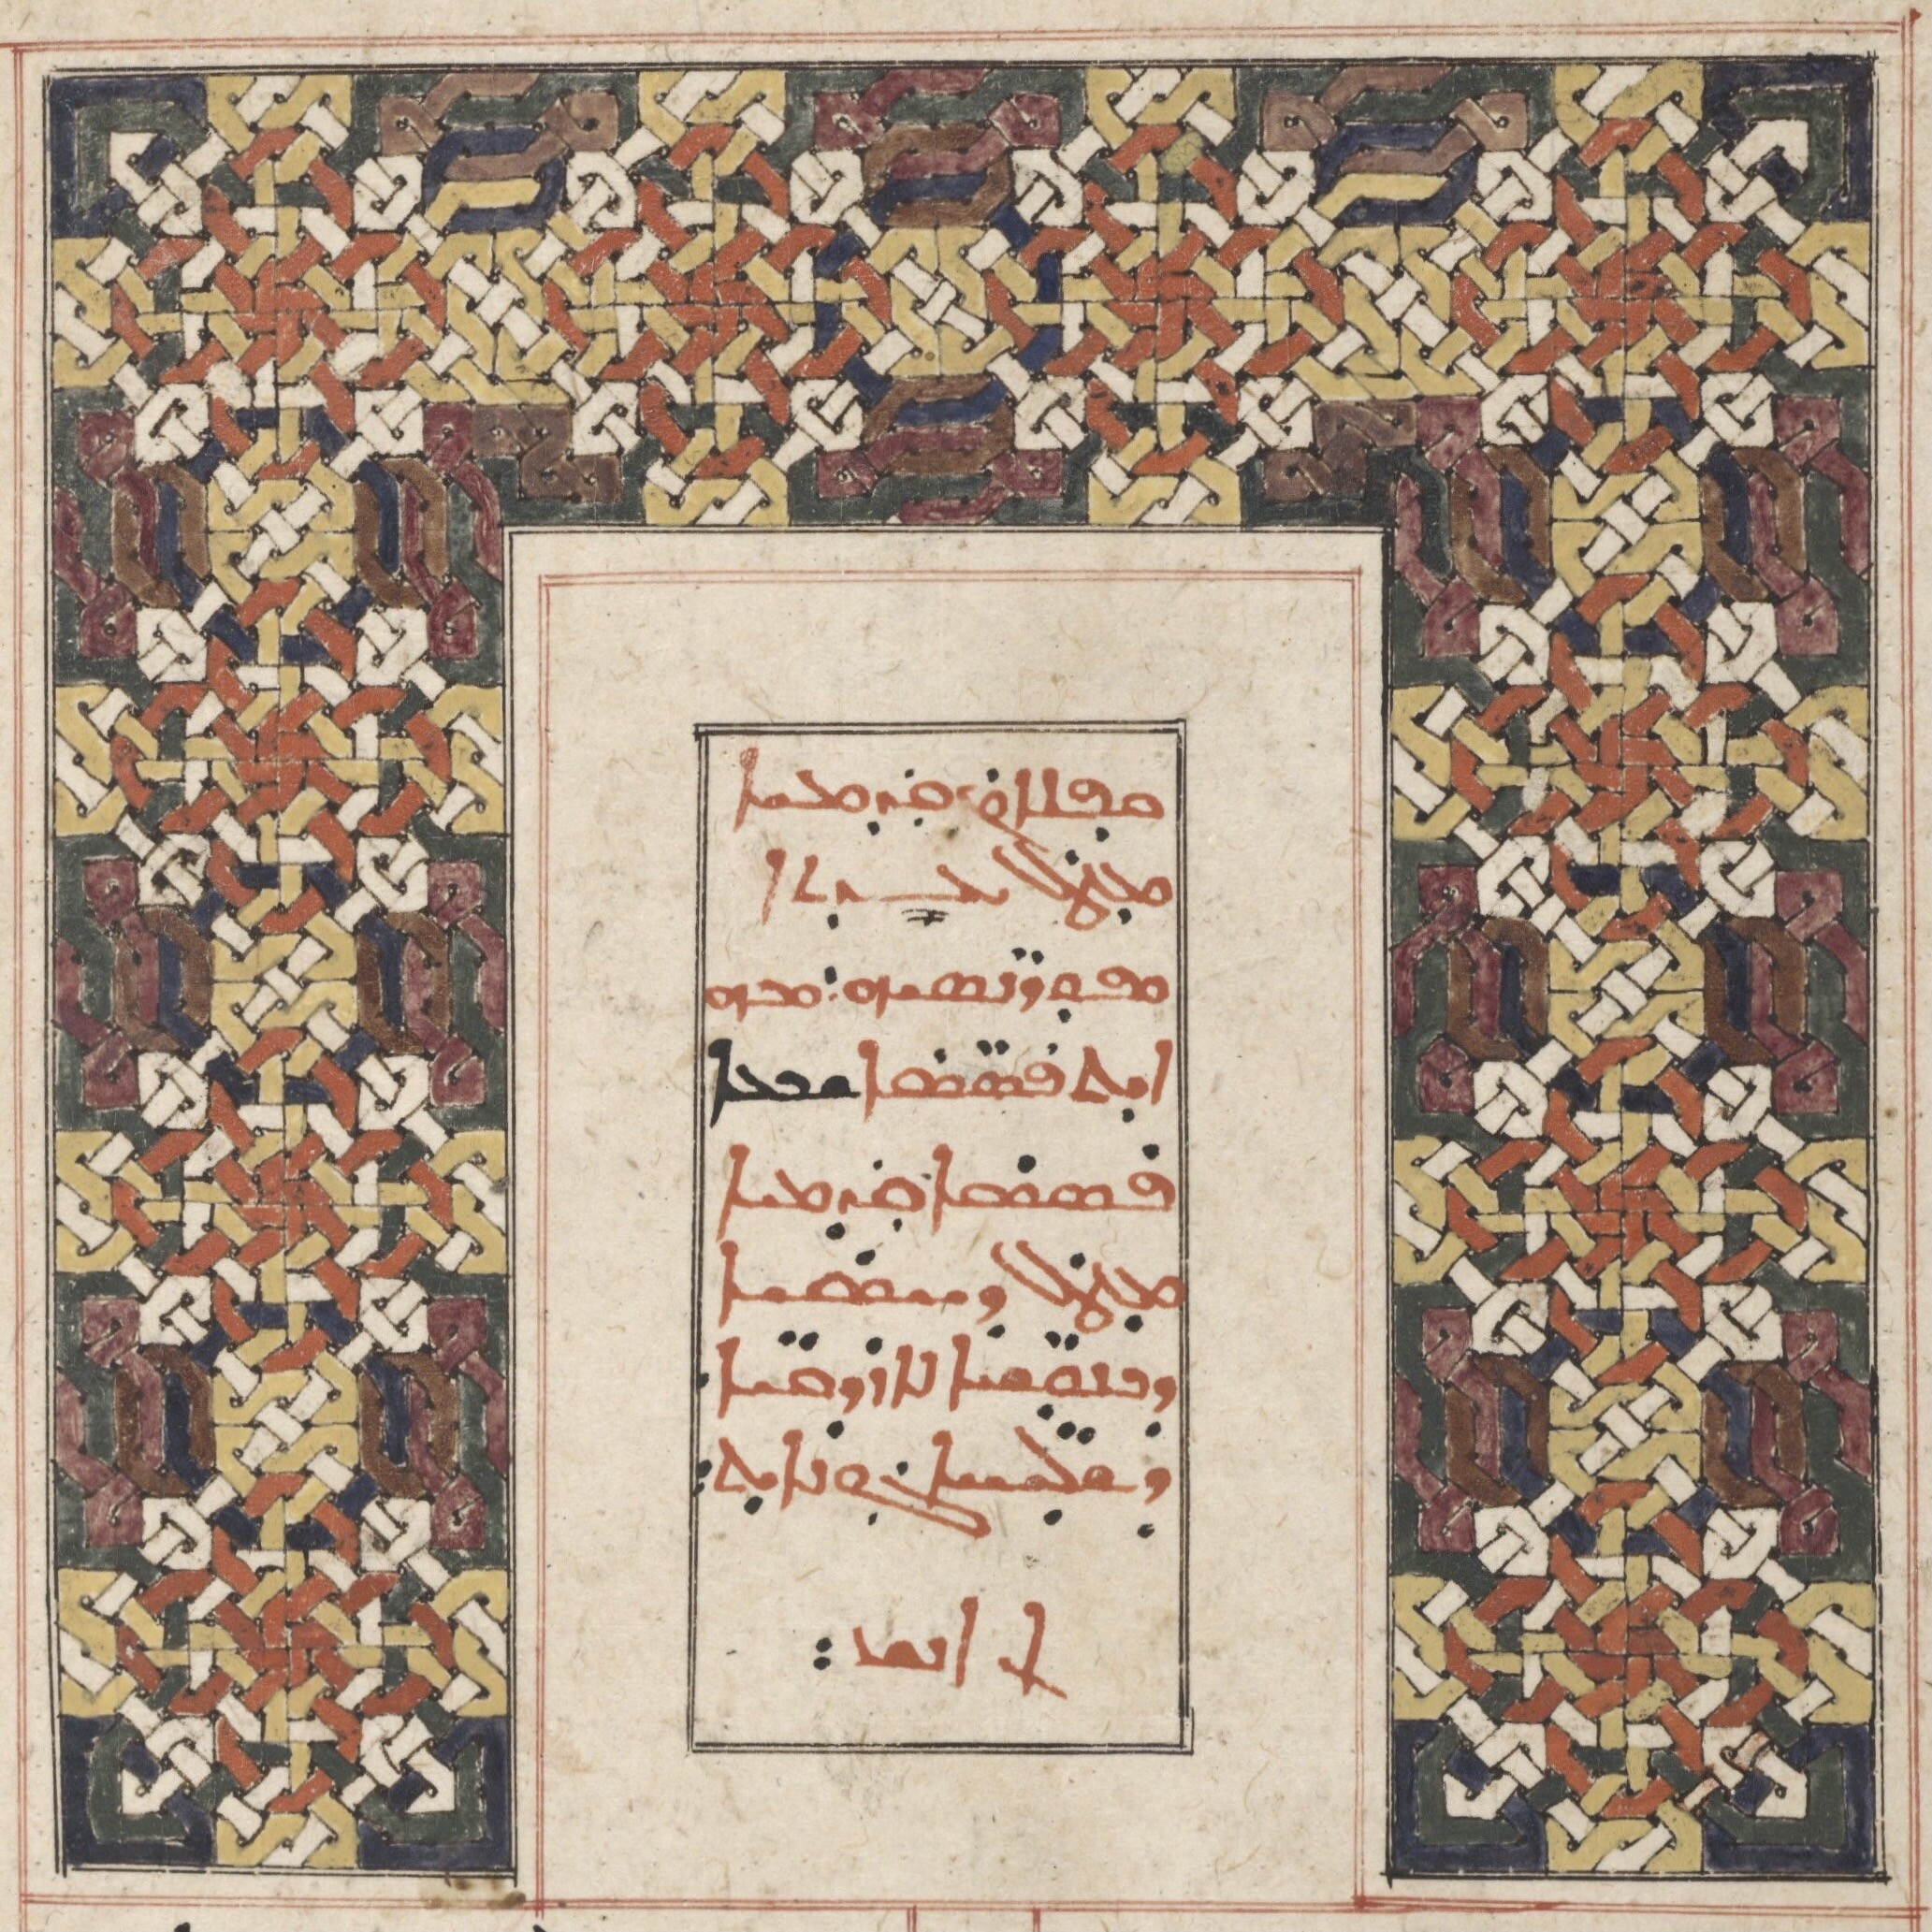 Interlaced geometric designs surrounding red and black text in the Syriac script.